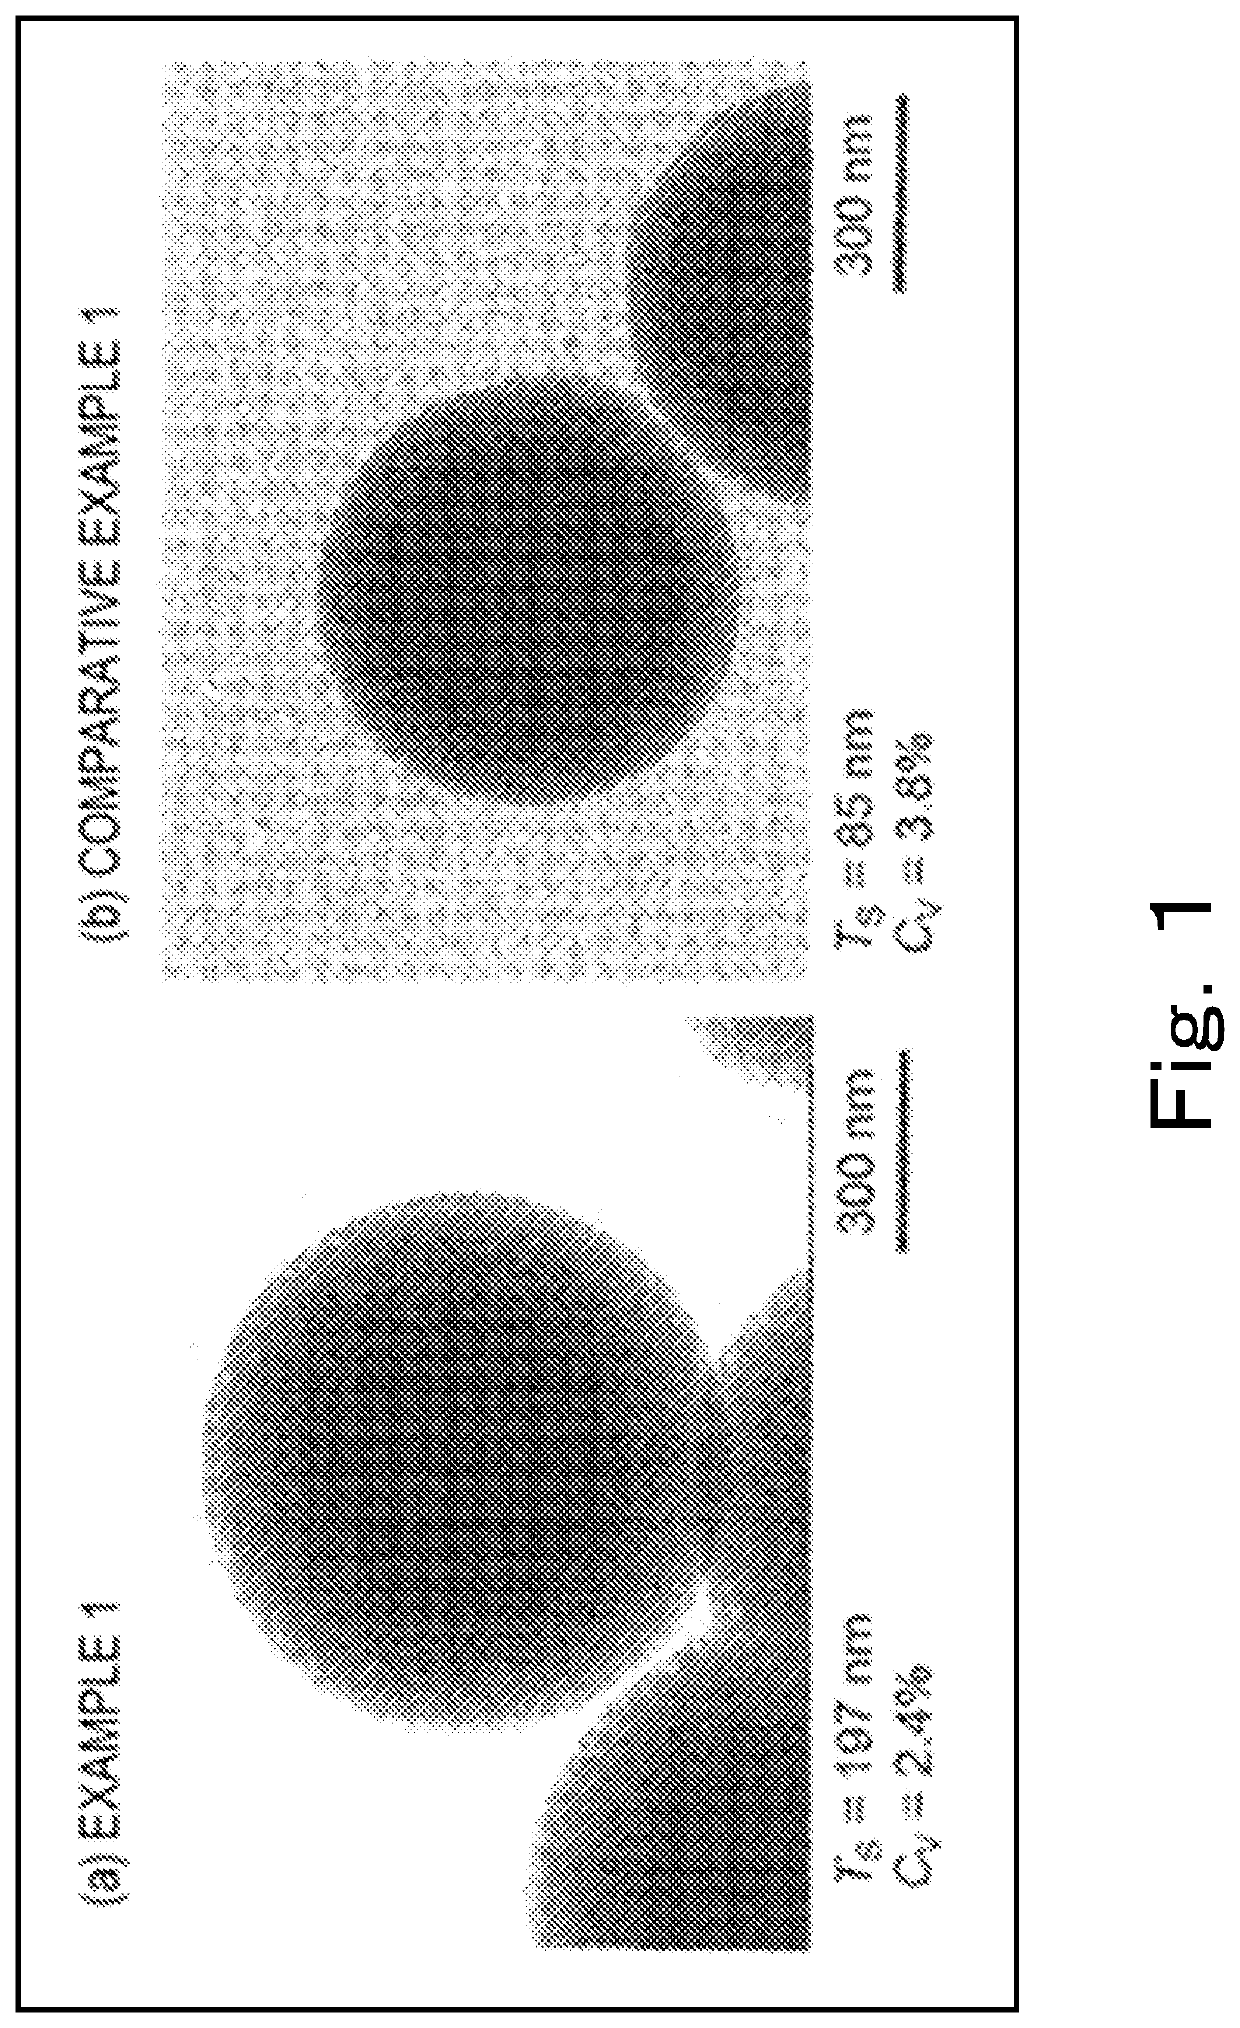 Method for producing core-shell porous silica particles